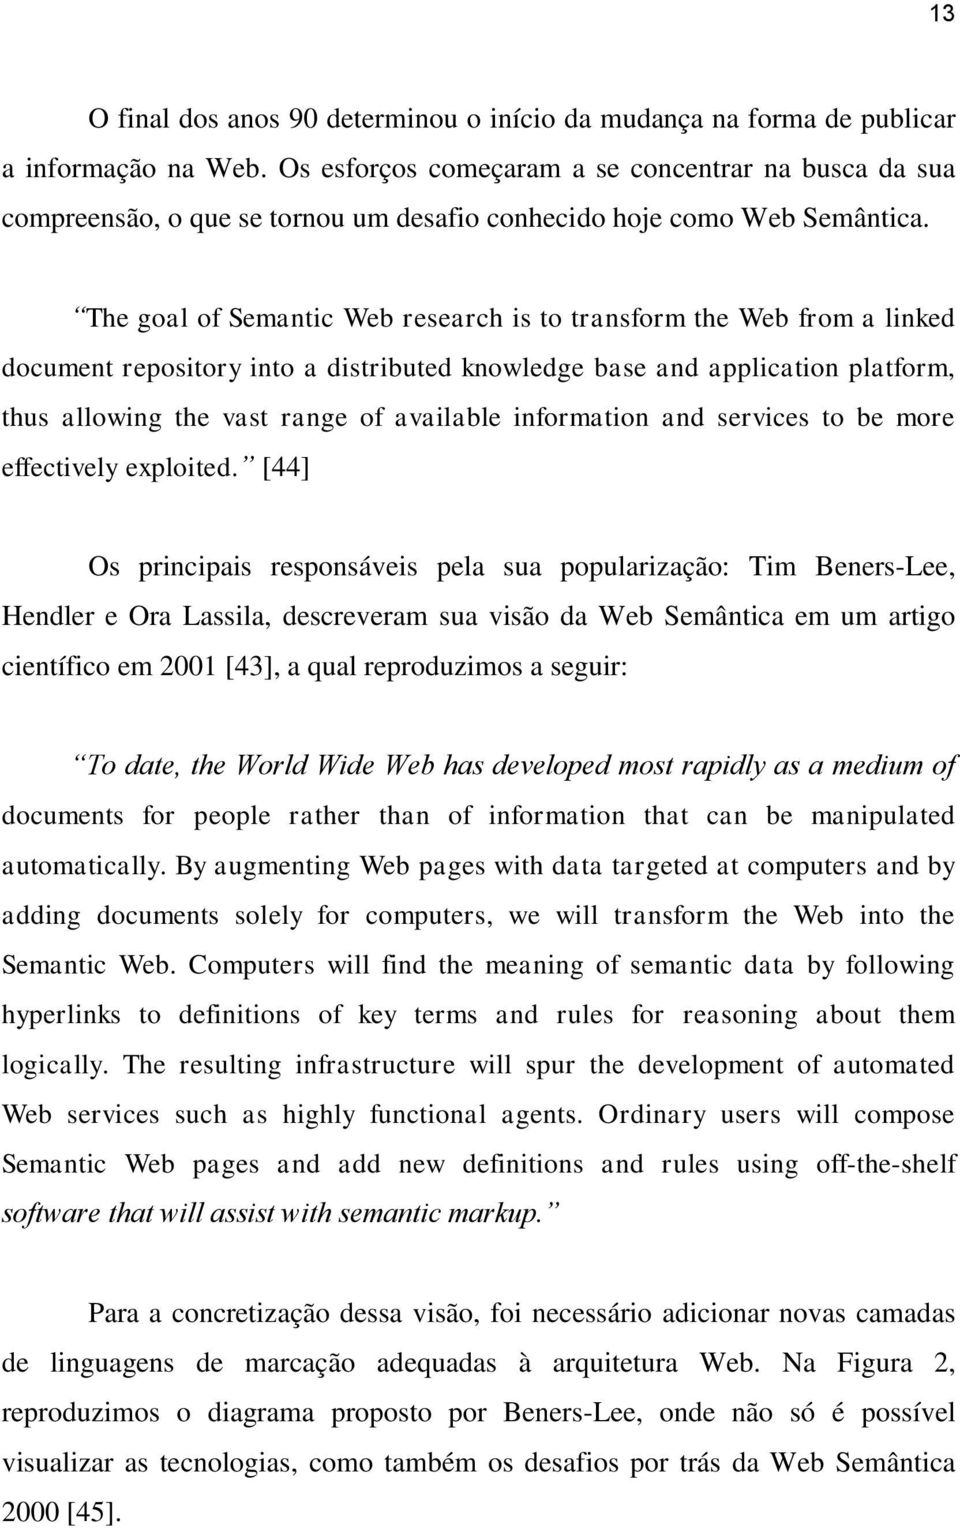 The goal of Semantic Web research is to transform the Web from a linked document repository into a distributed knowledge base and application platform, thus allowing the vast range of available